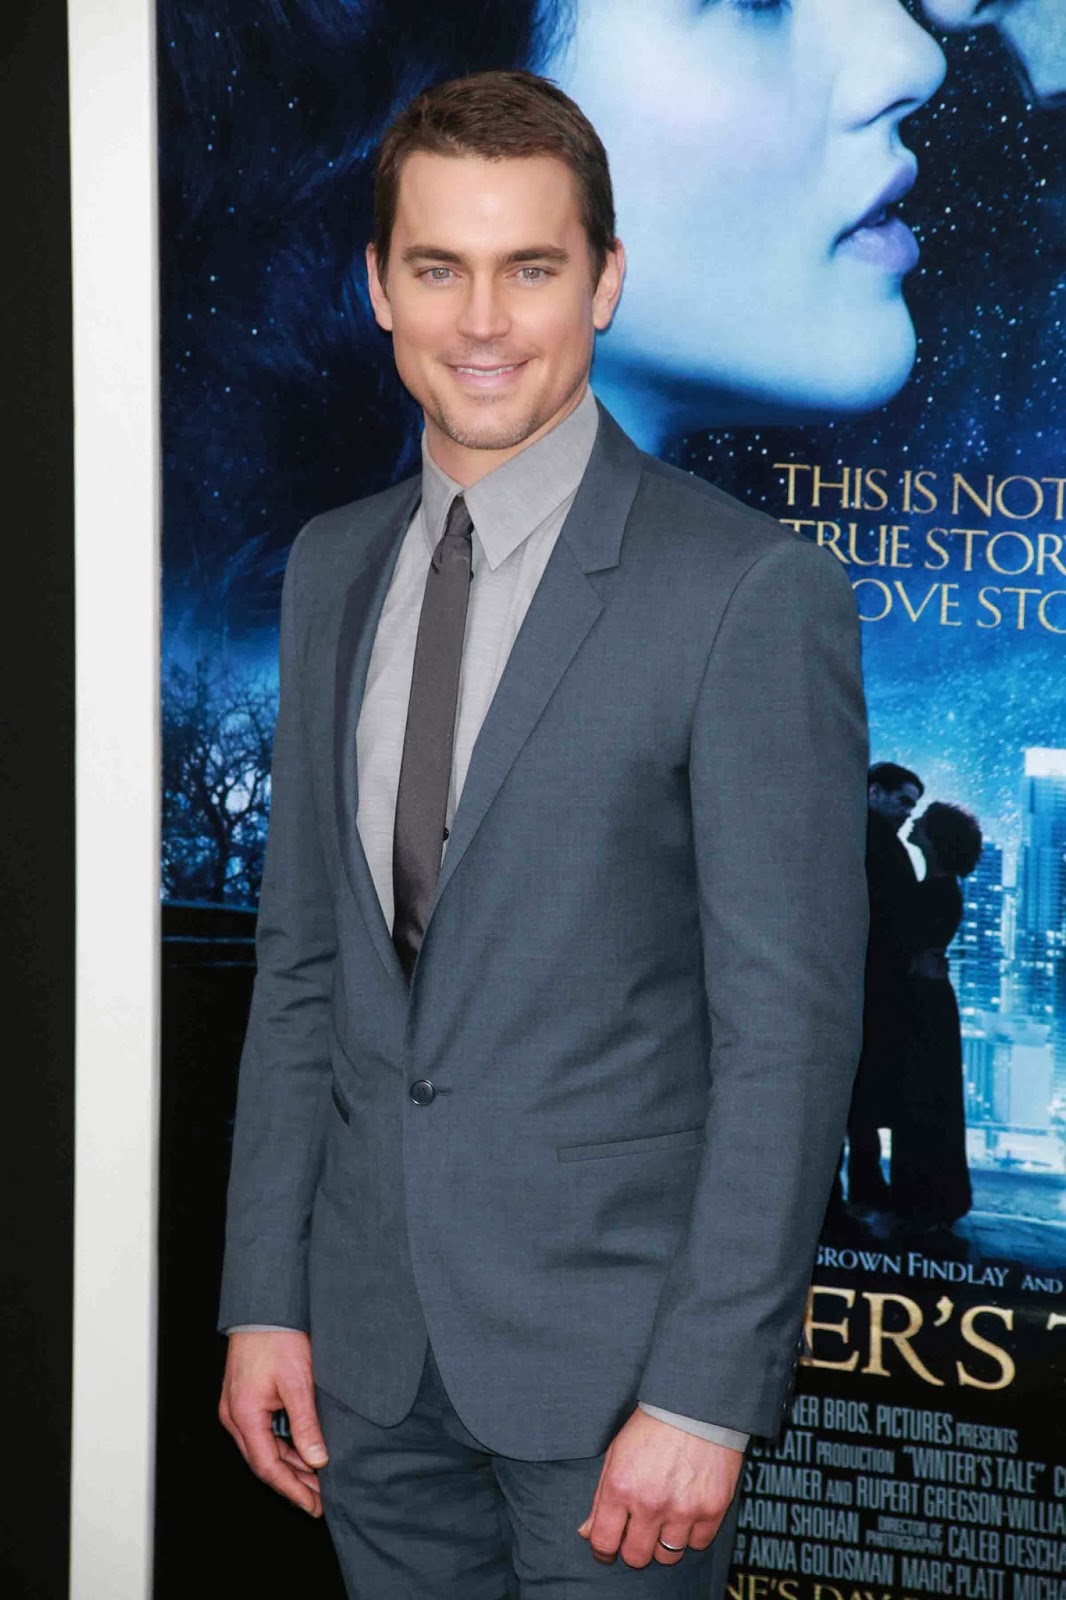 THE NEW YORK CITY PREMIERE OF 'WINTER'S TALE'